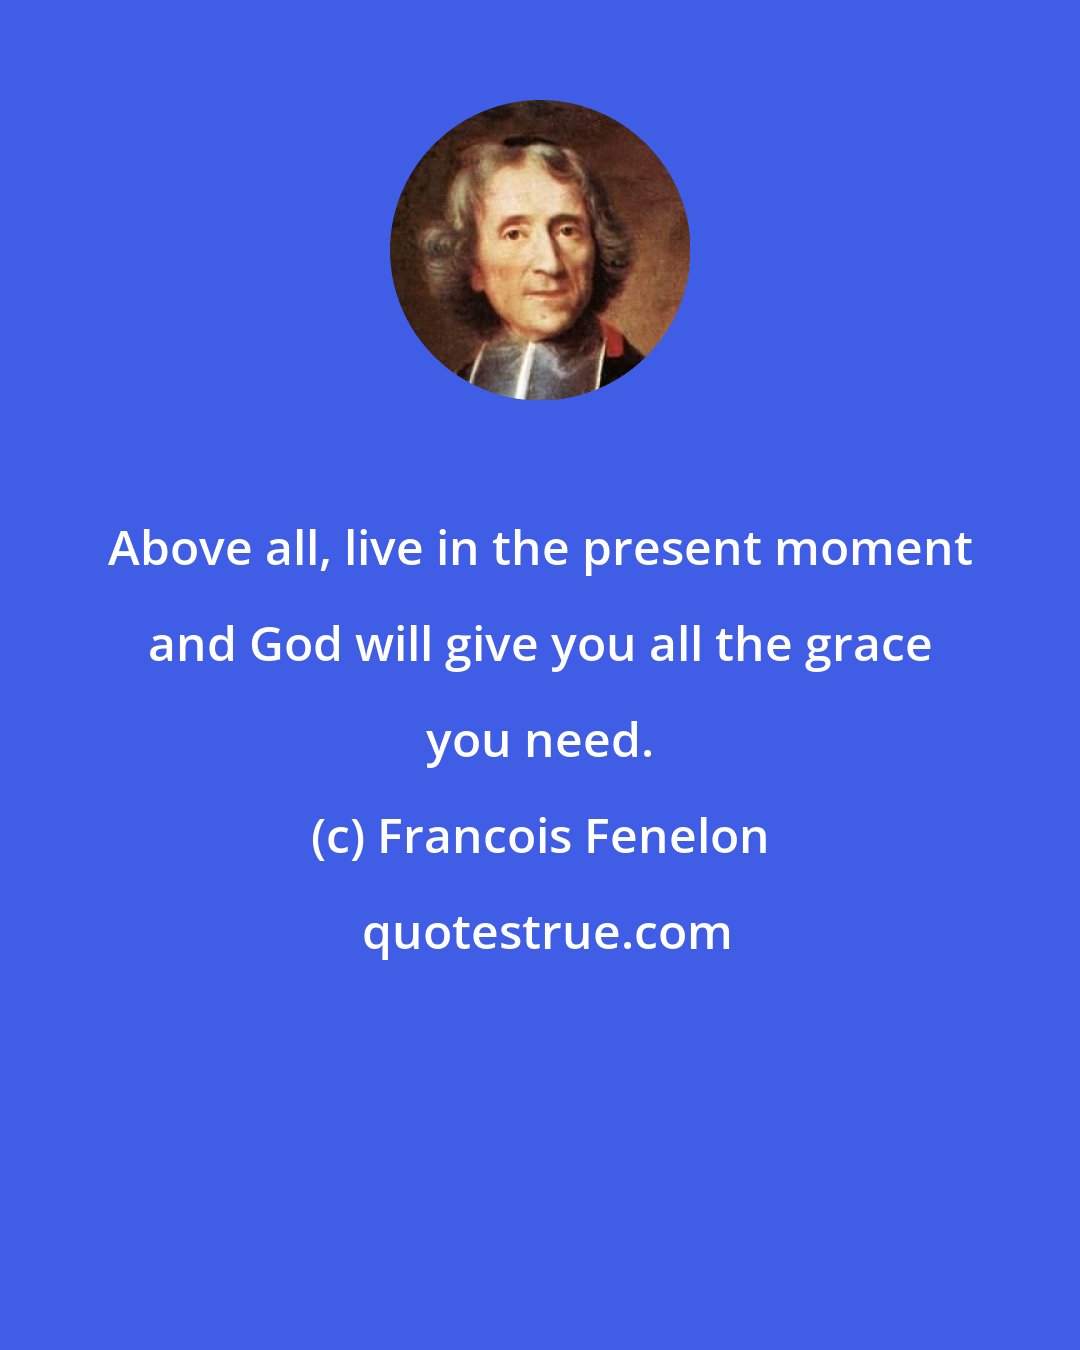 Francois Fenelon: Above all, live in the present moment and God will give you all the grace you need.